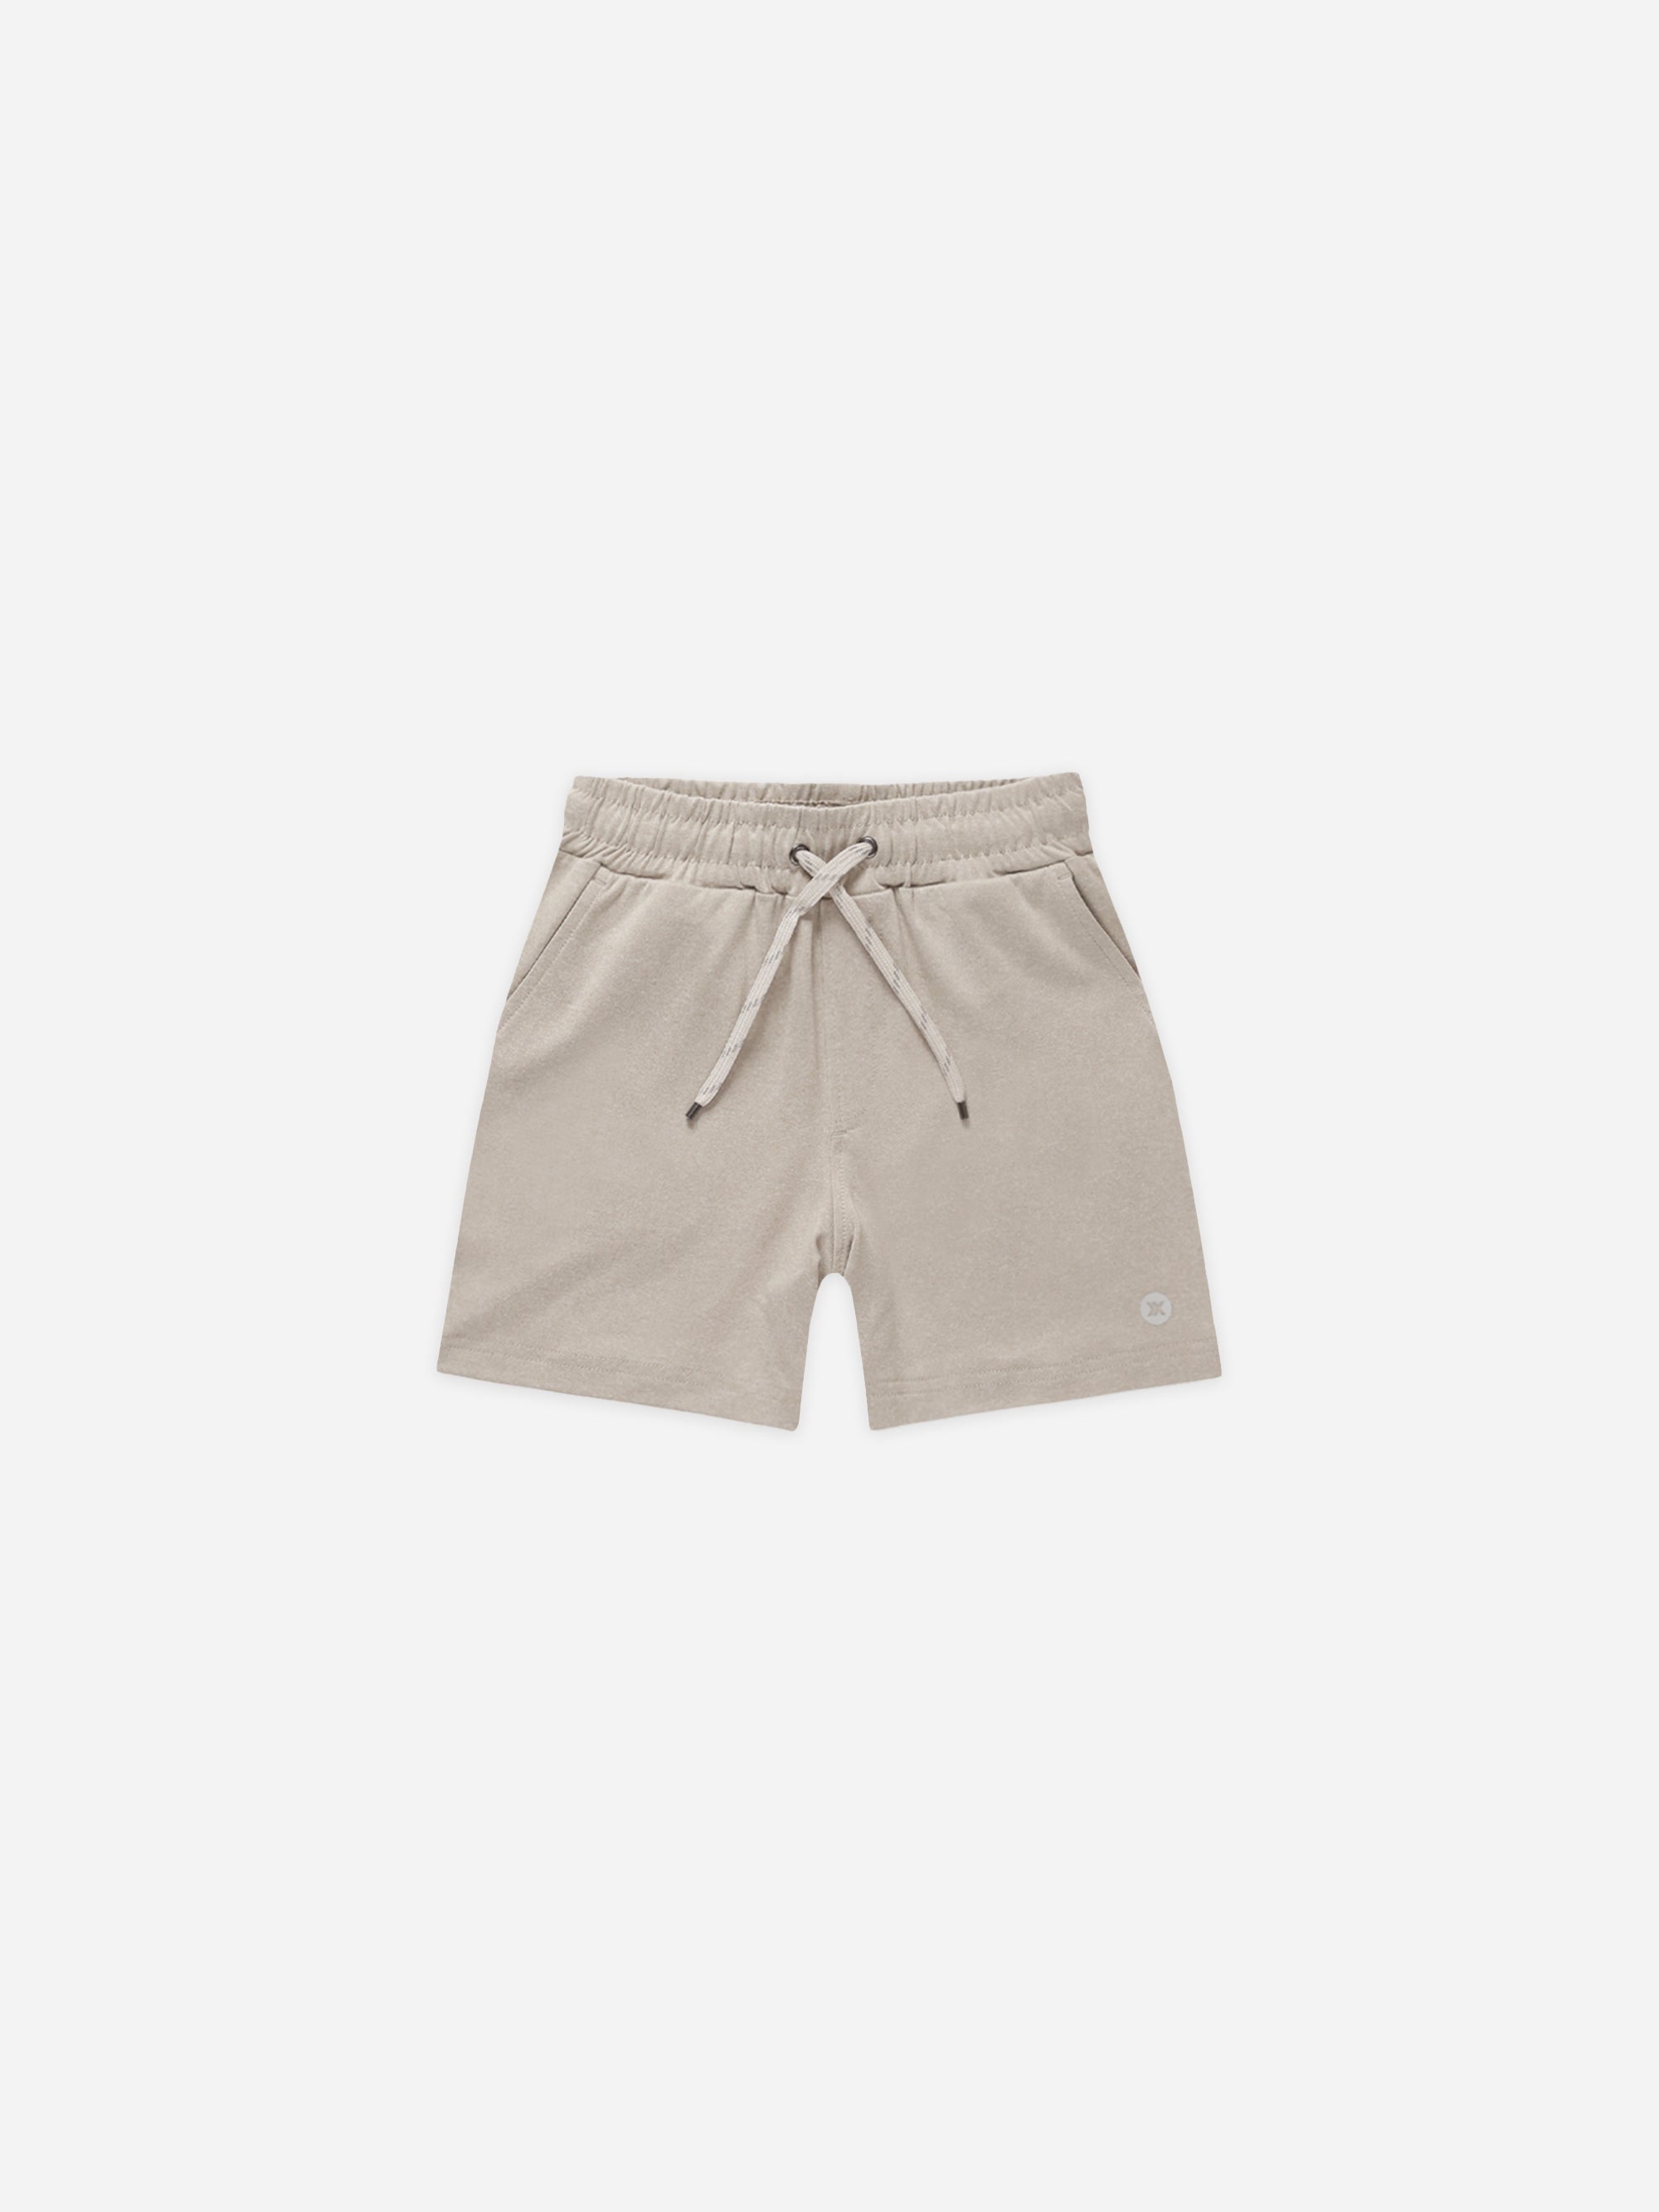 Oceanside Tech Short || Heathered Dove - Rylee + Cru | Kids Clothes | Trendy Baby Clothes | Modern Infant Outfits |